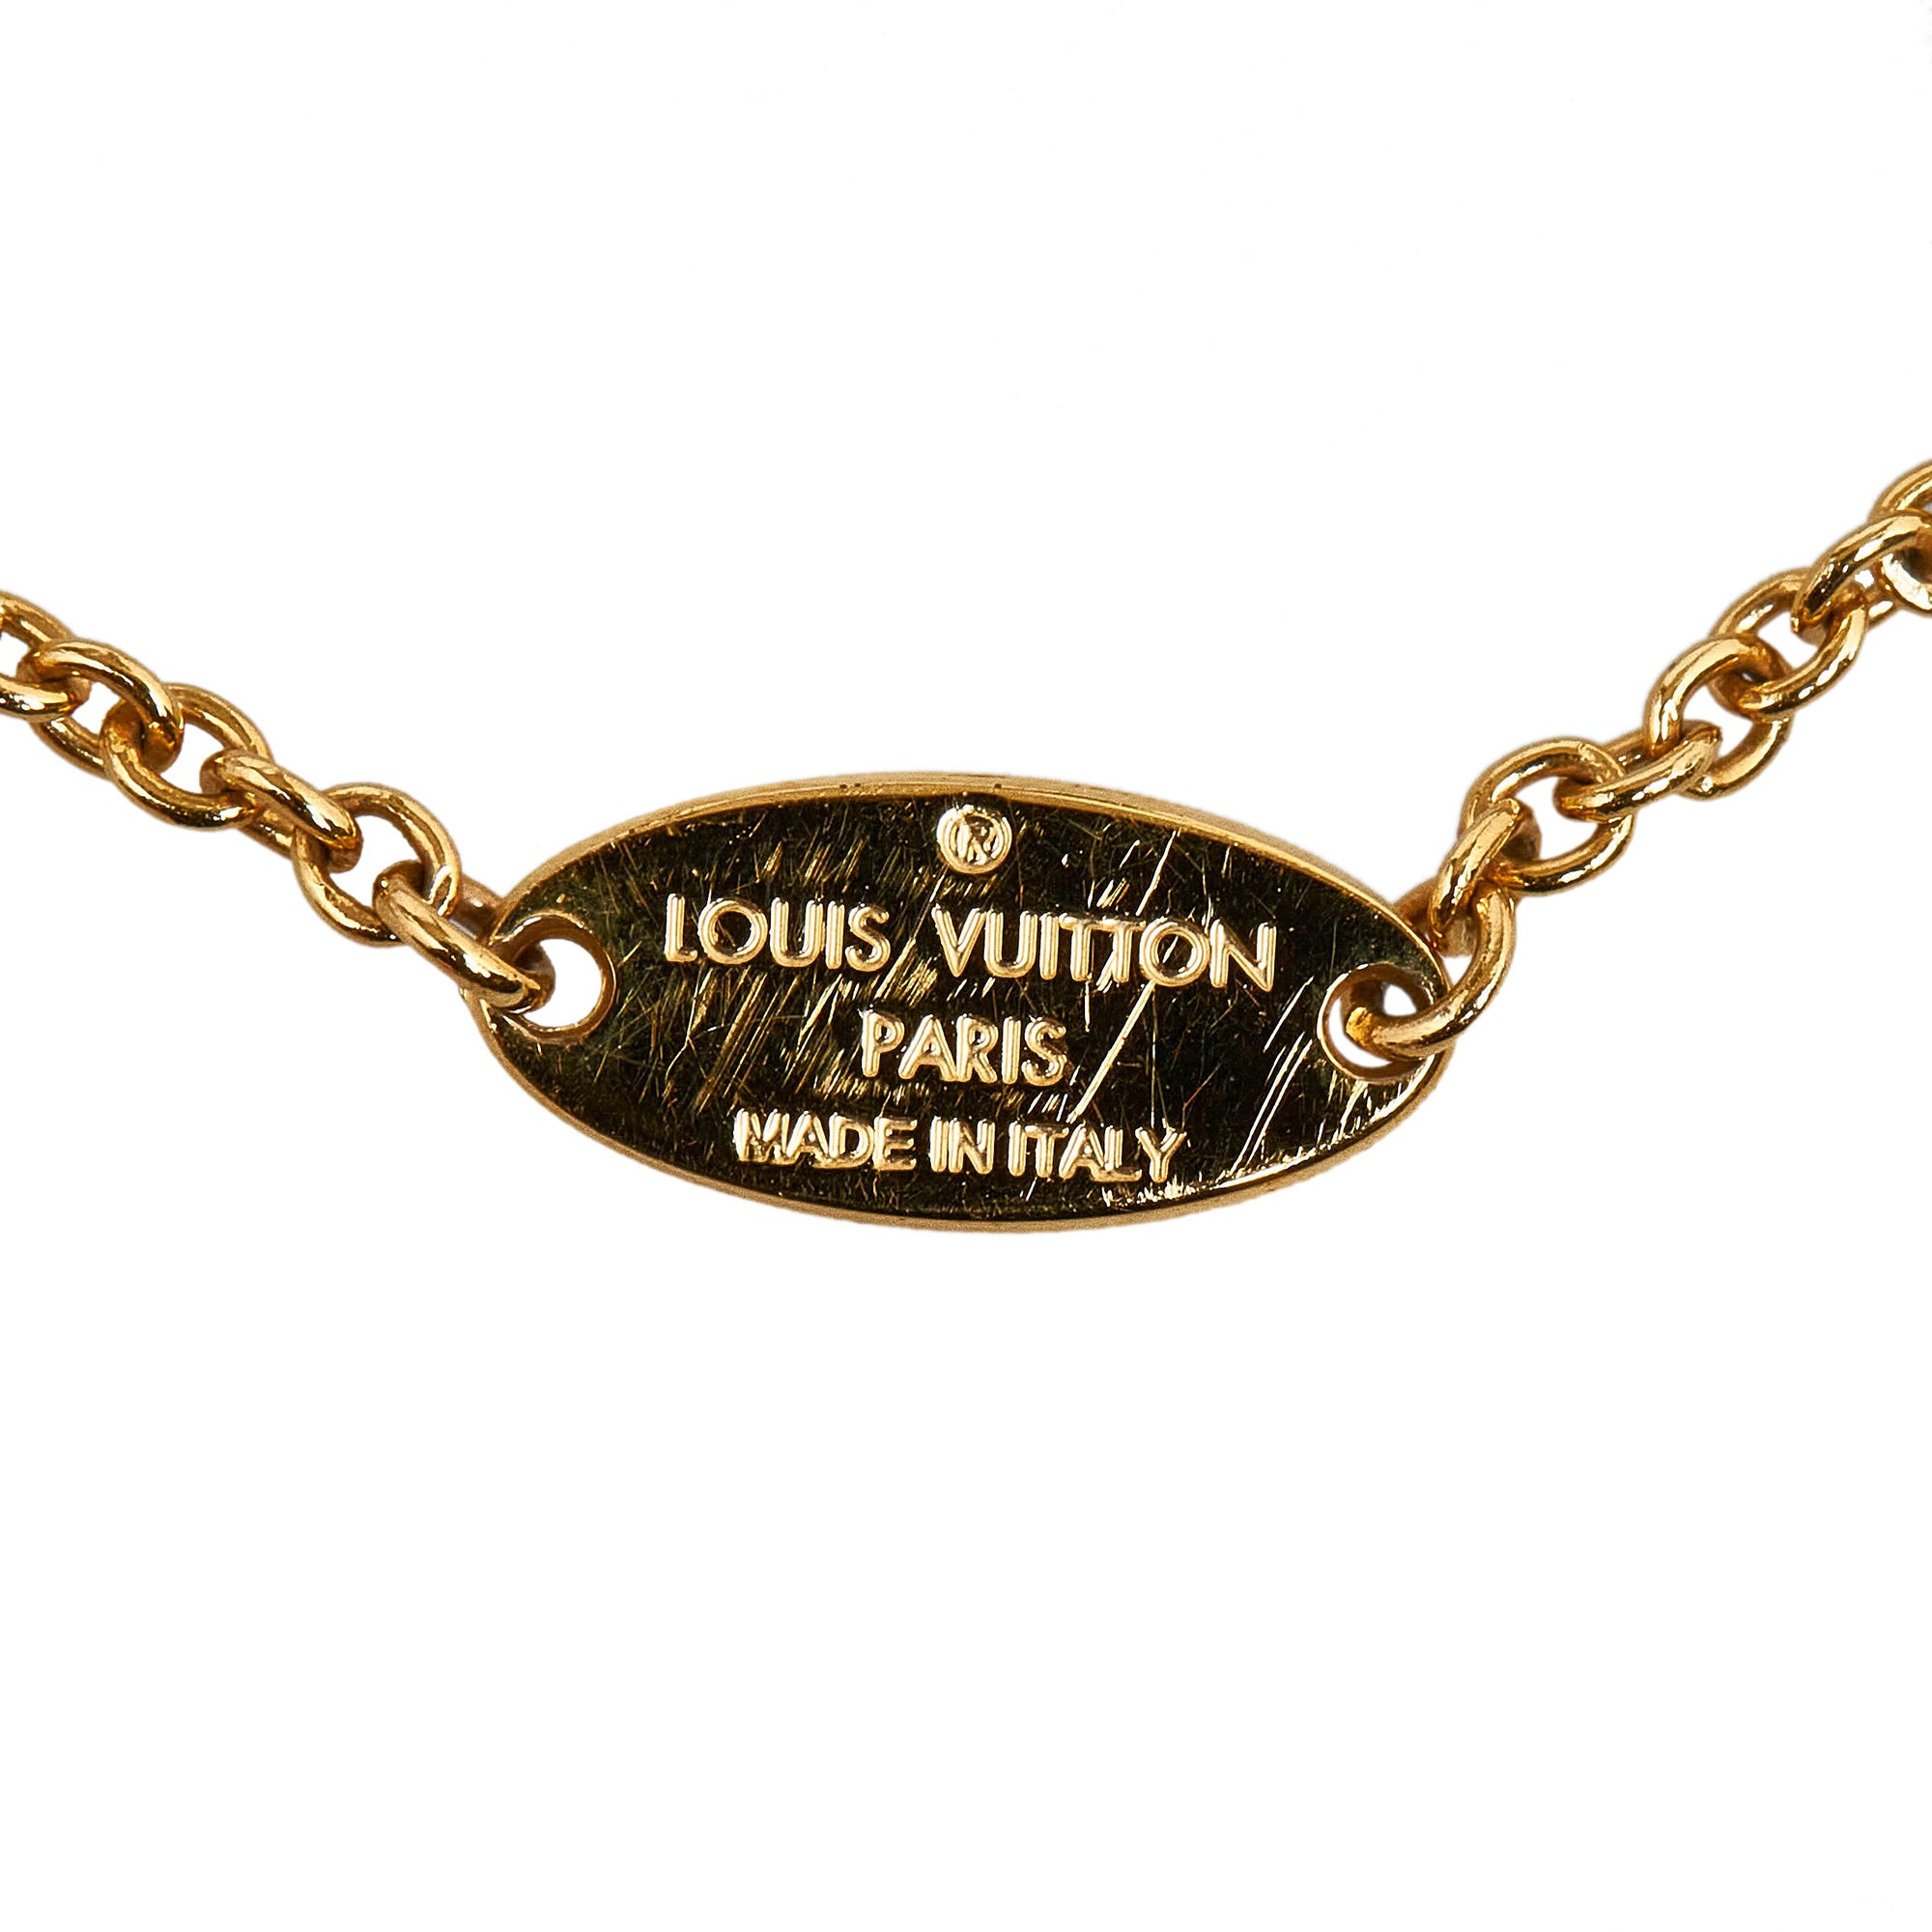 Louis Vuitton Blooming Strass Necklace - Brass Chain, Necklaces - LOU715944